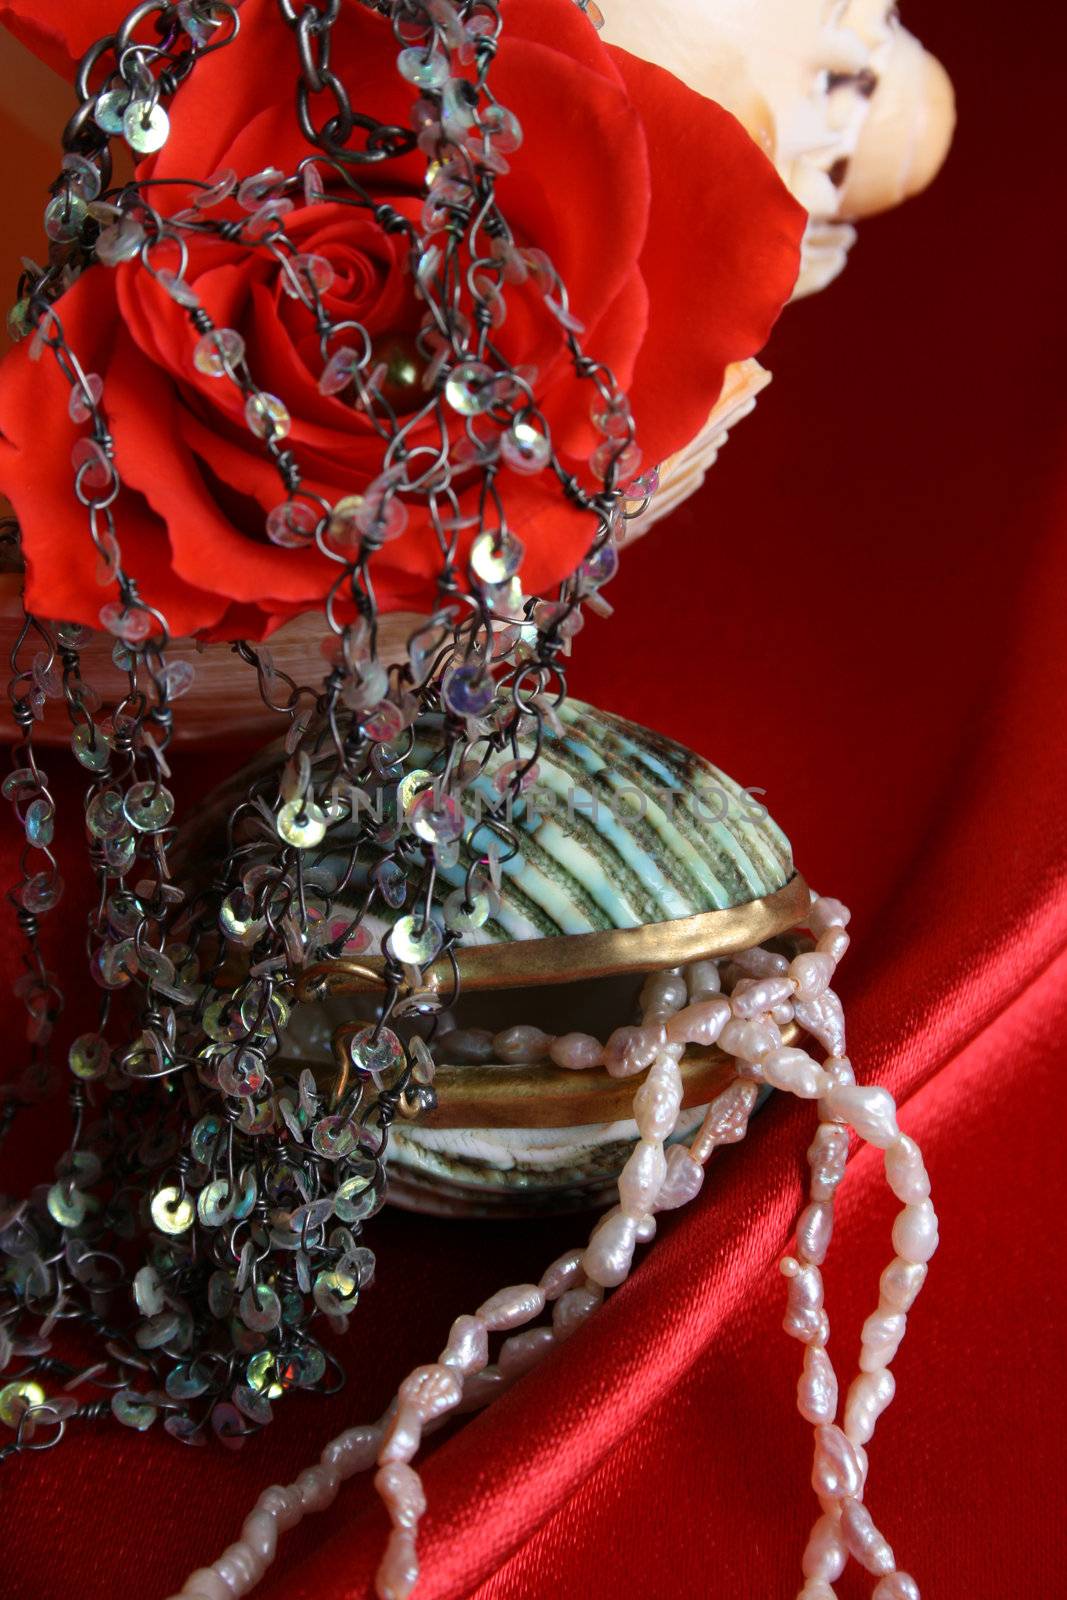 Beautiful shell container with jewellery and string of pearls